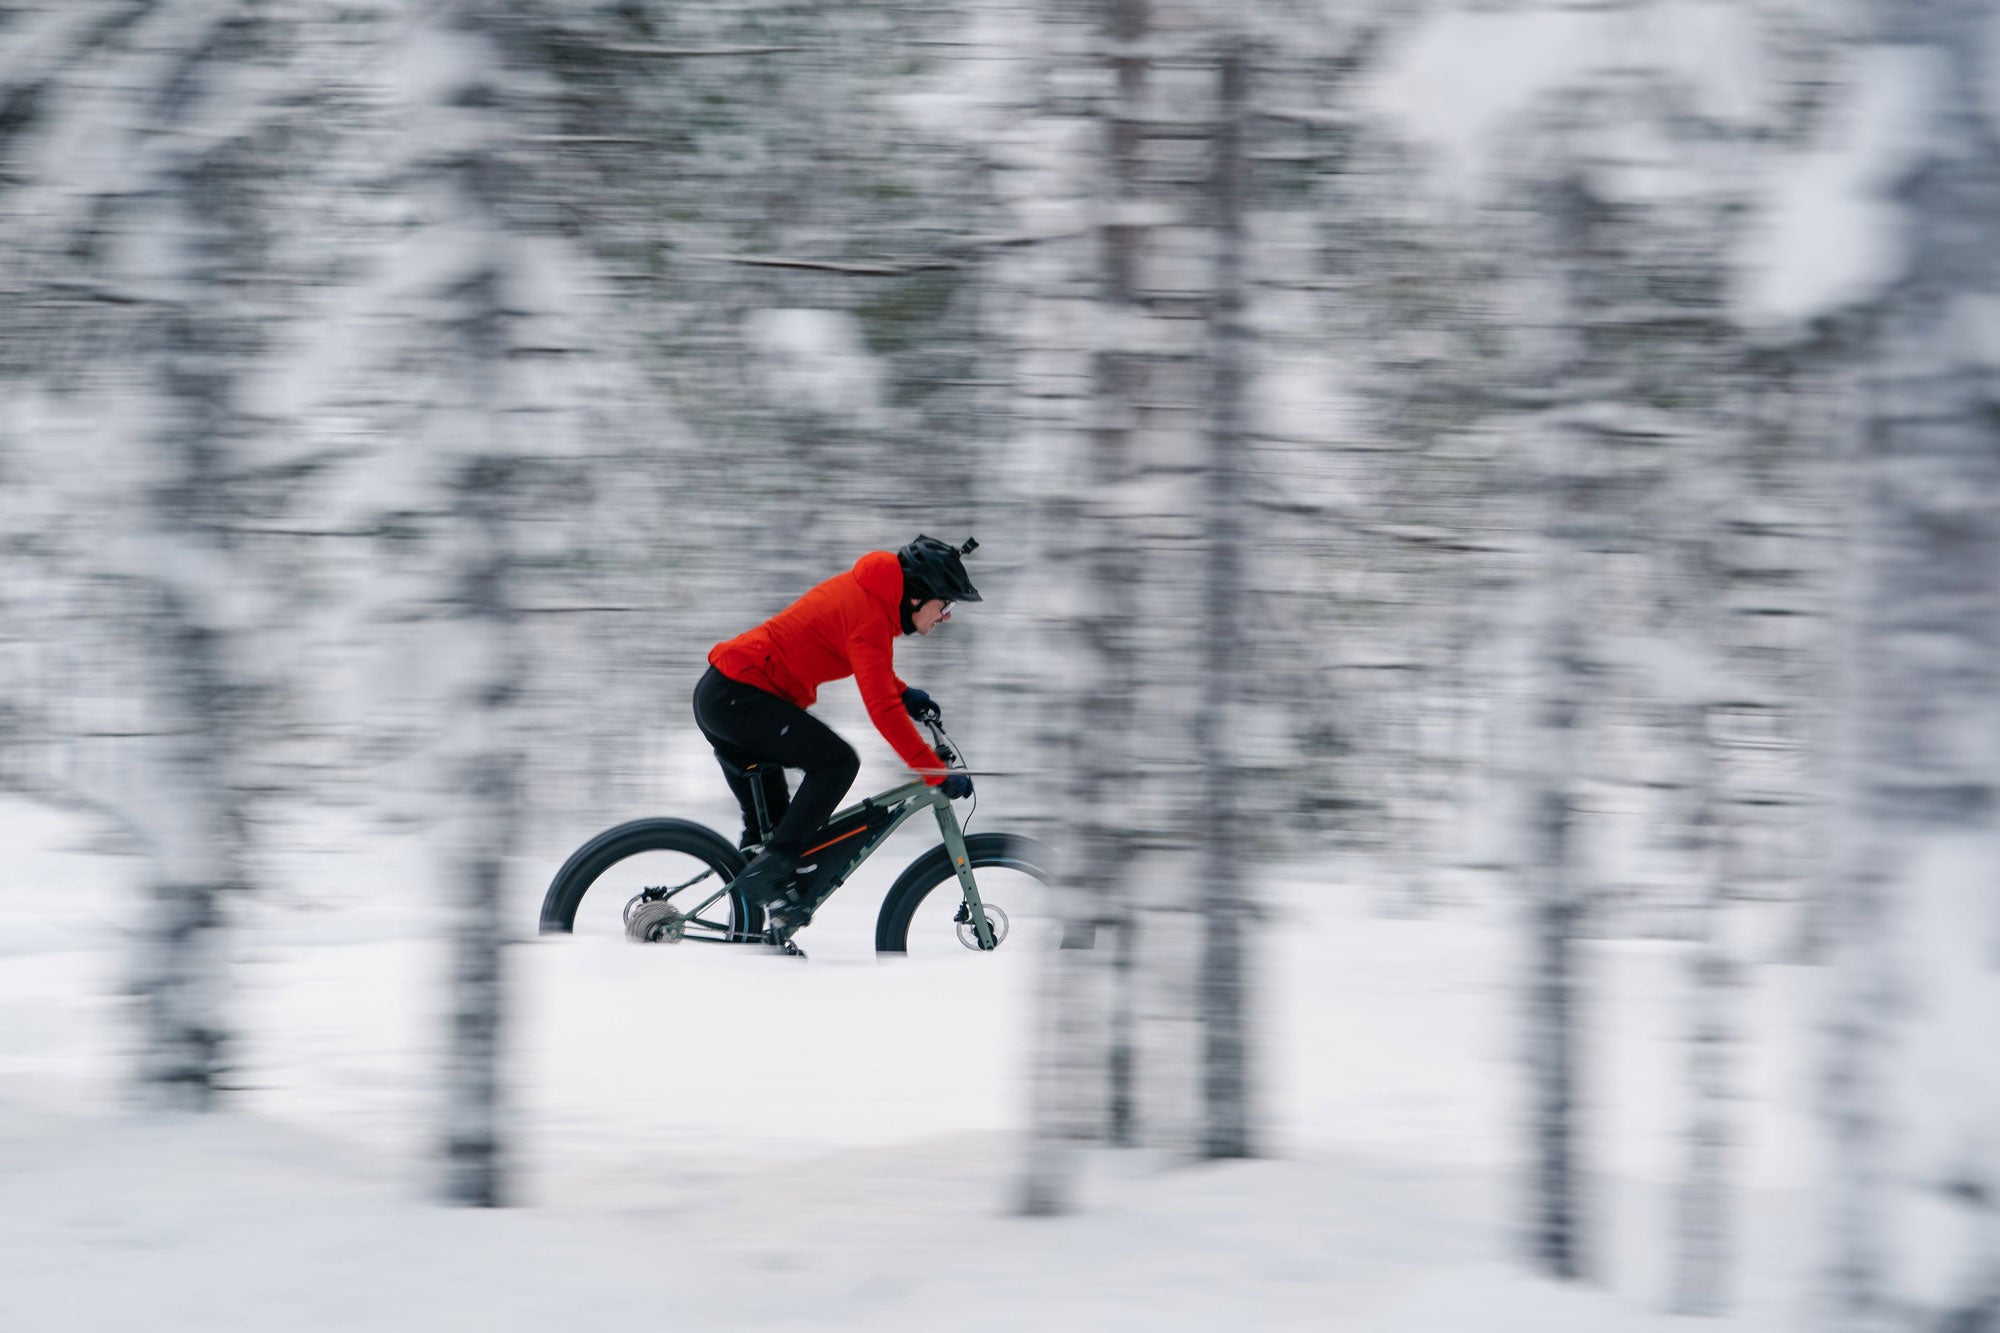 Antti Laiho riding a Kona Woo in Lapland